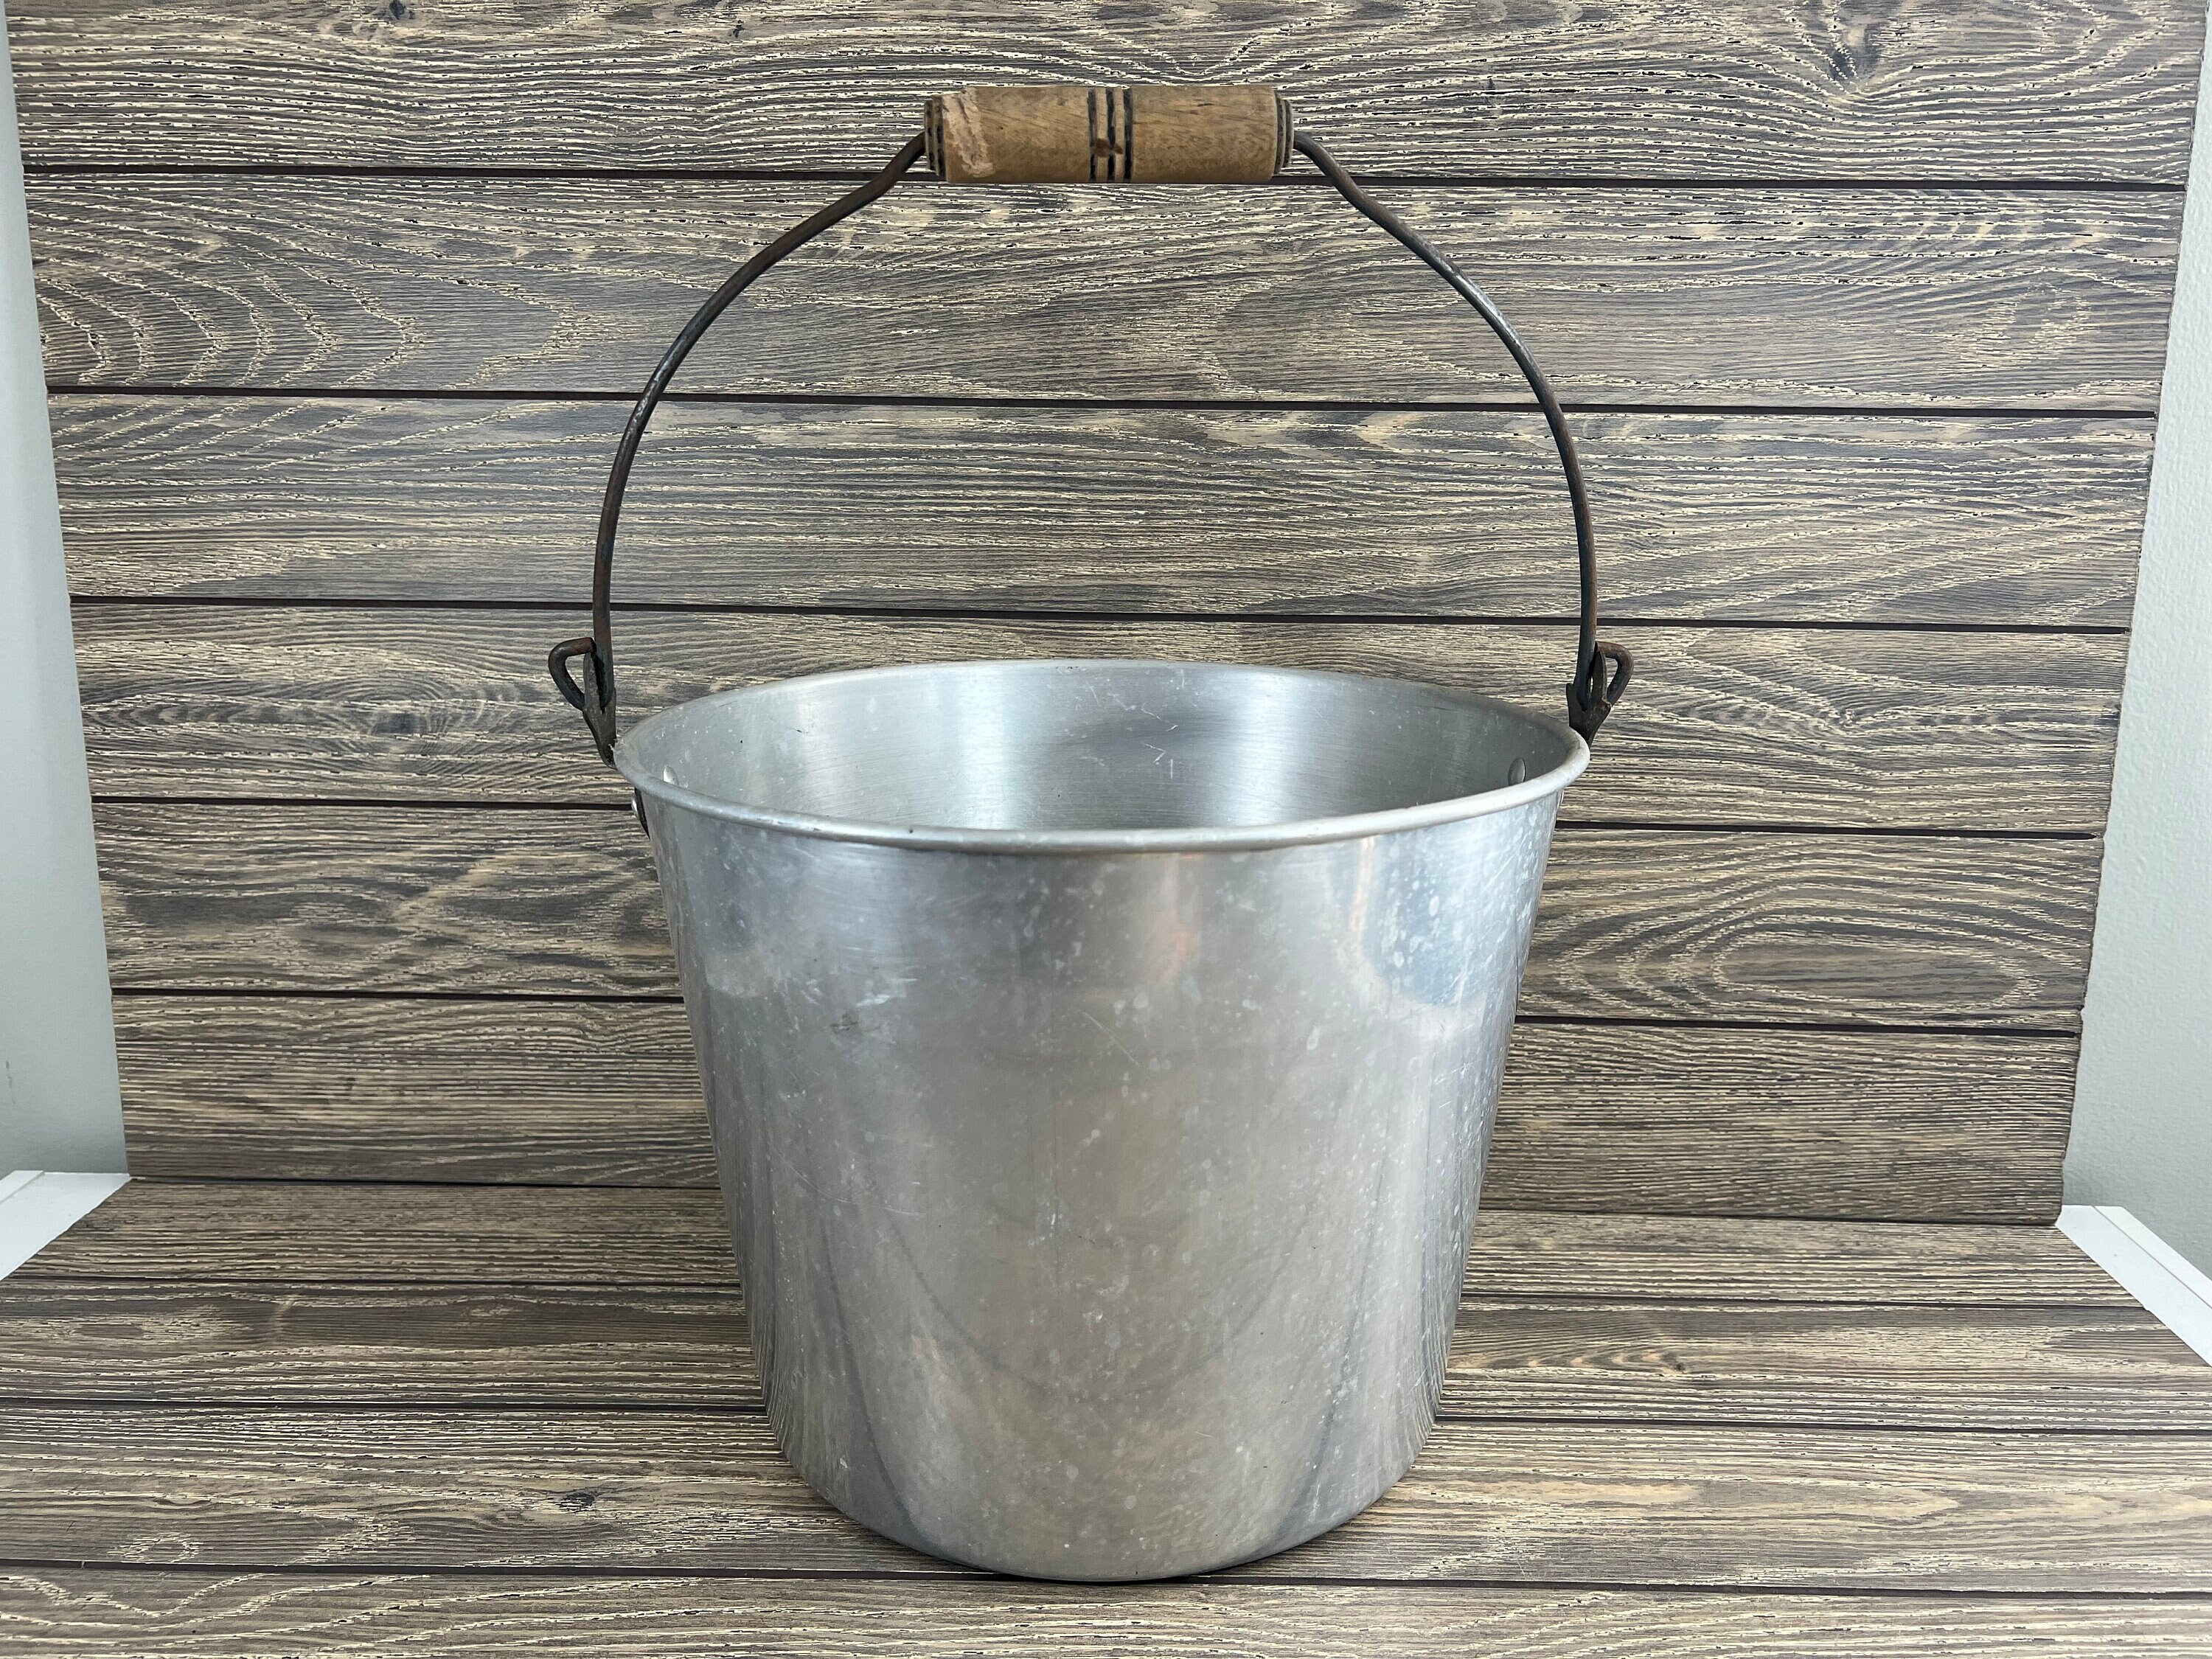 Vintage Used Old Metal Wire Handle Rustic Small Bucket Pail Decorative